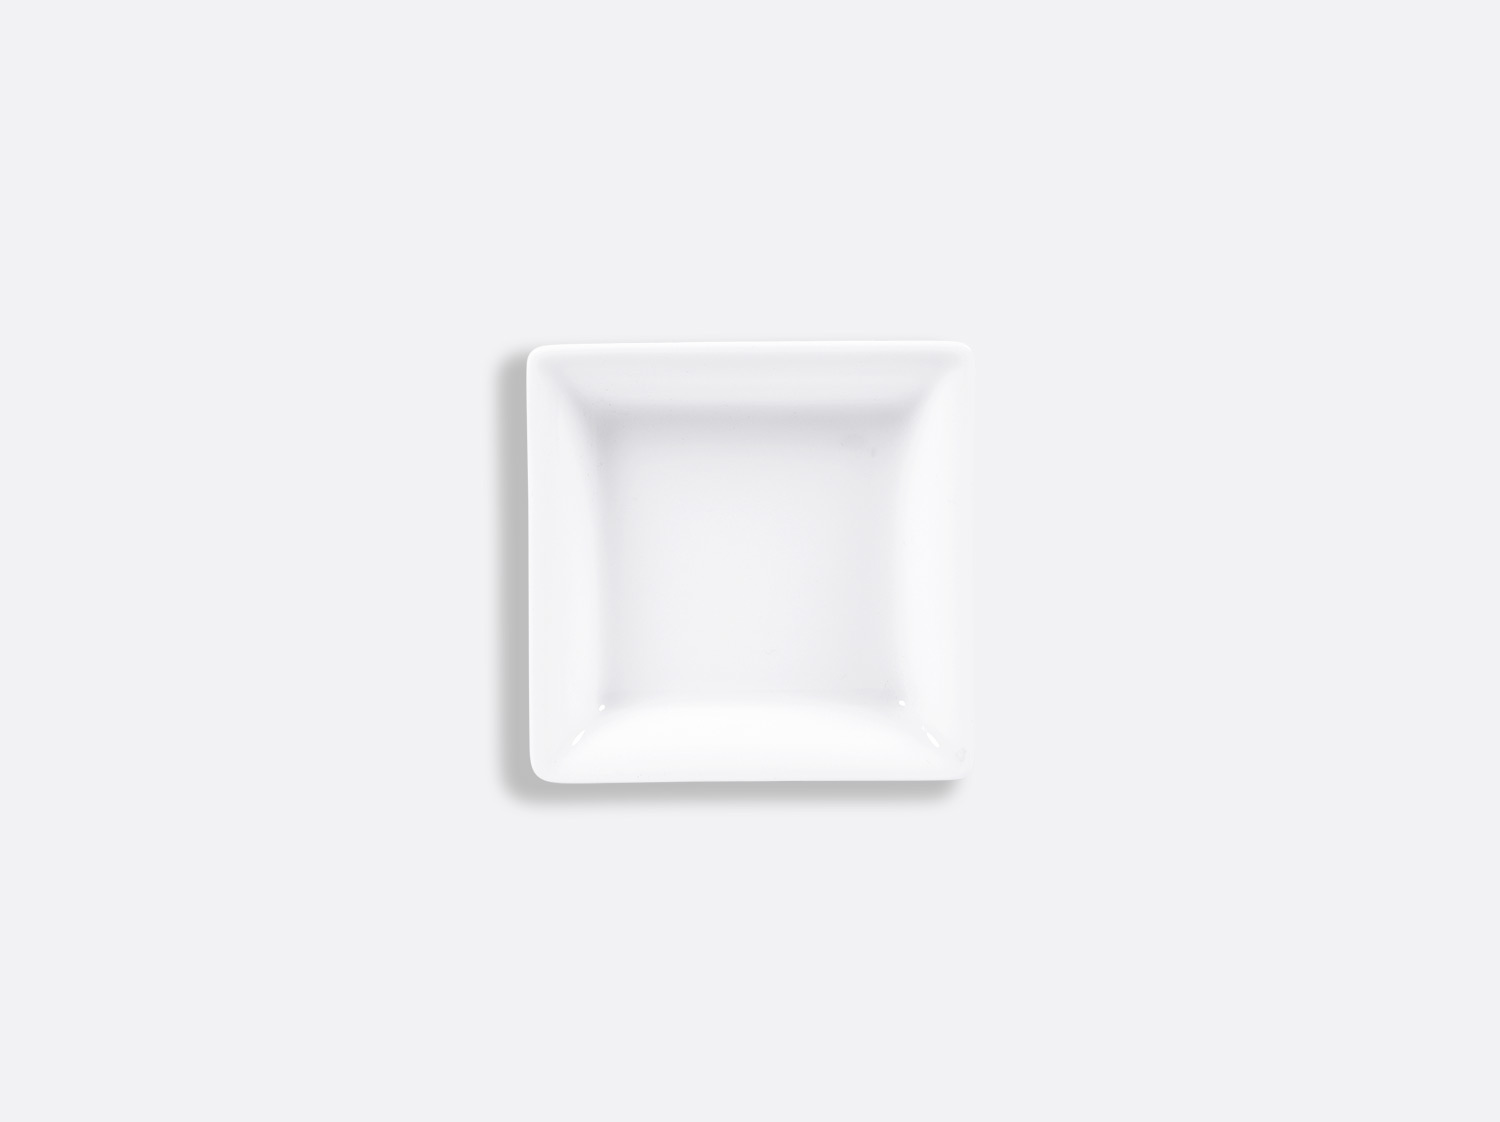 China Square ashtray 8 x 8 cm of the collection Fantaisies blanches | Bernardaud